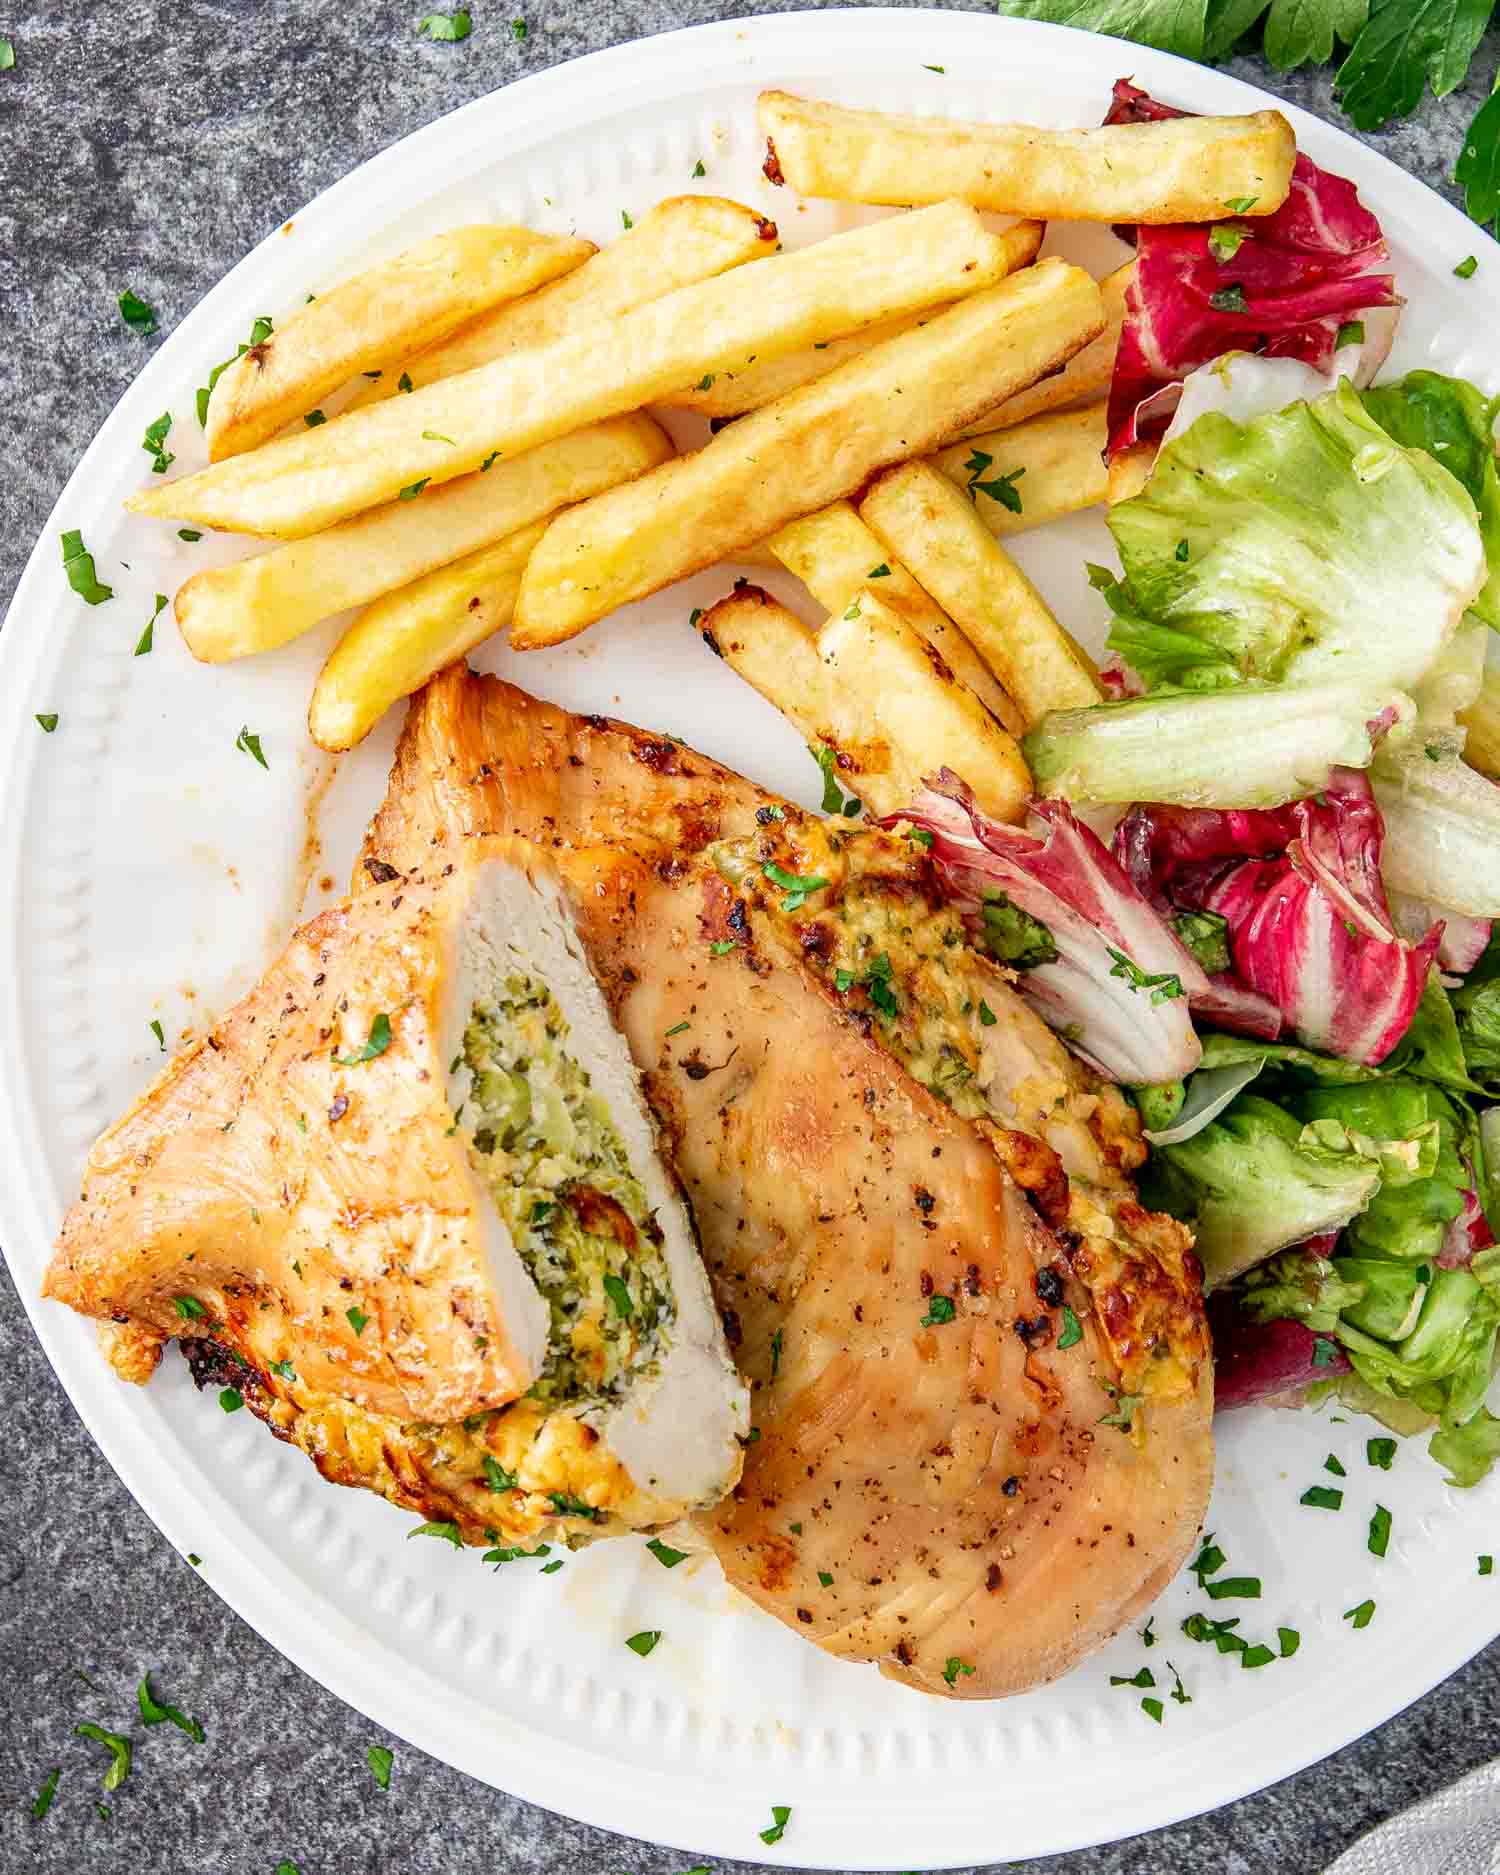 a broccoli cheese stuffed chicken breast on a plate with french fries and a salad.